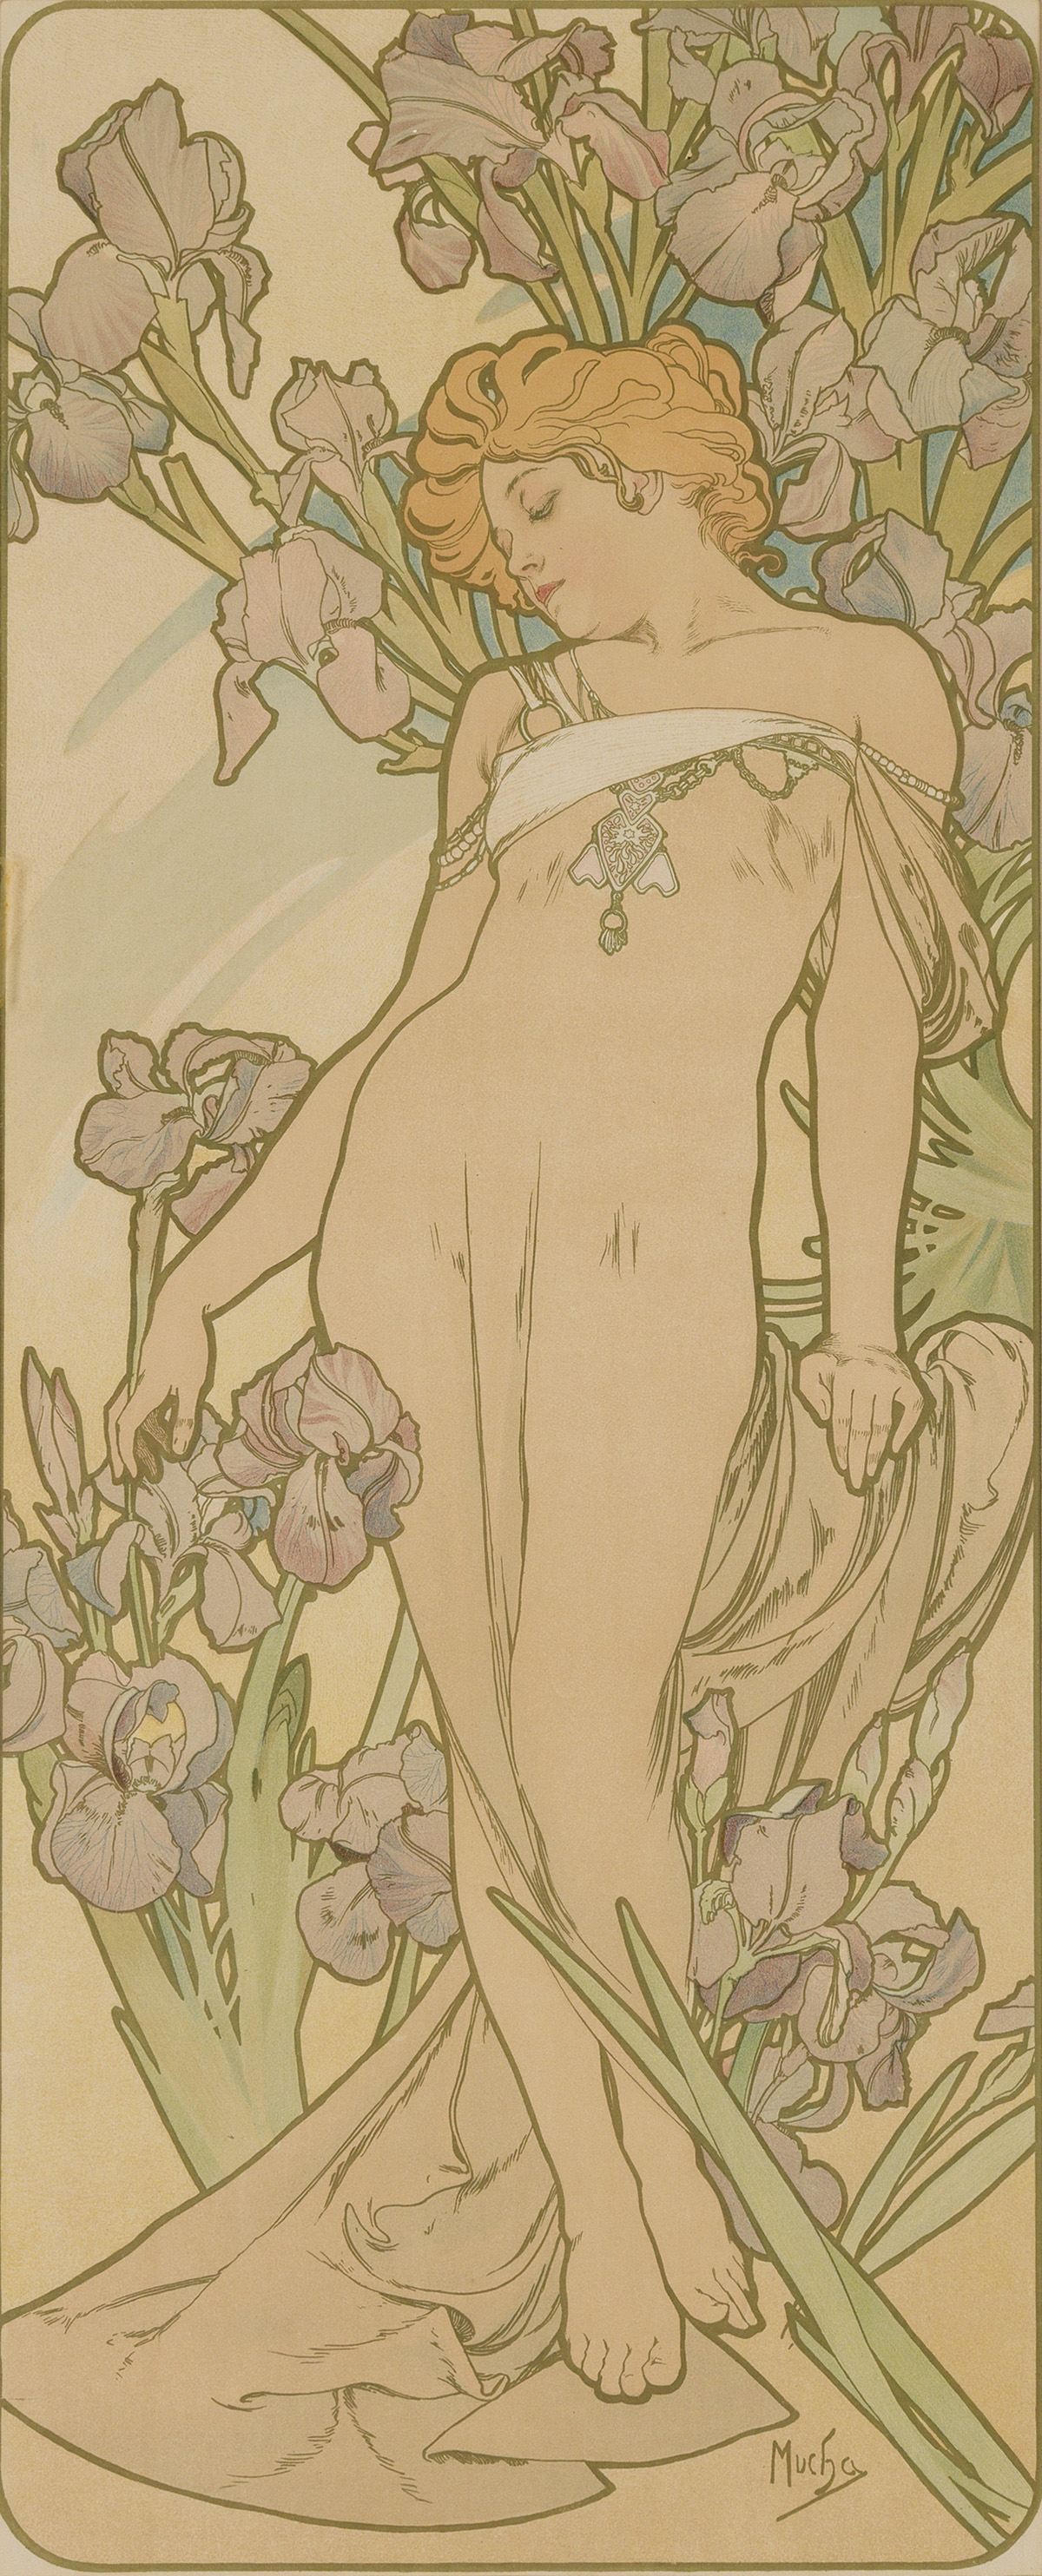 ALPHONSE MUCHA (1860-1939). [THE FLOWERS.] Group of 3 decorative panels. 1898. 40x16 inches, 101x42 cm. [F. Champenois, Paris.]